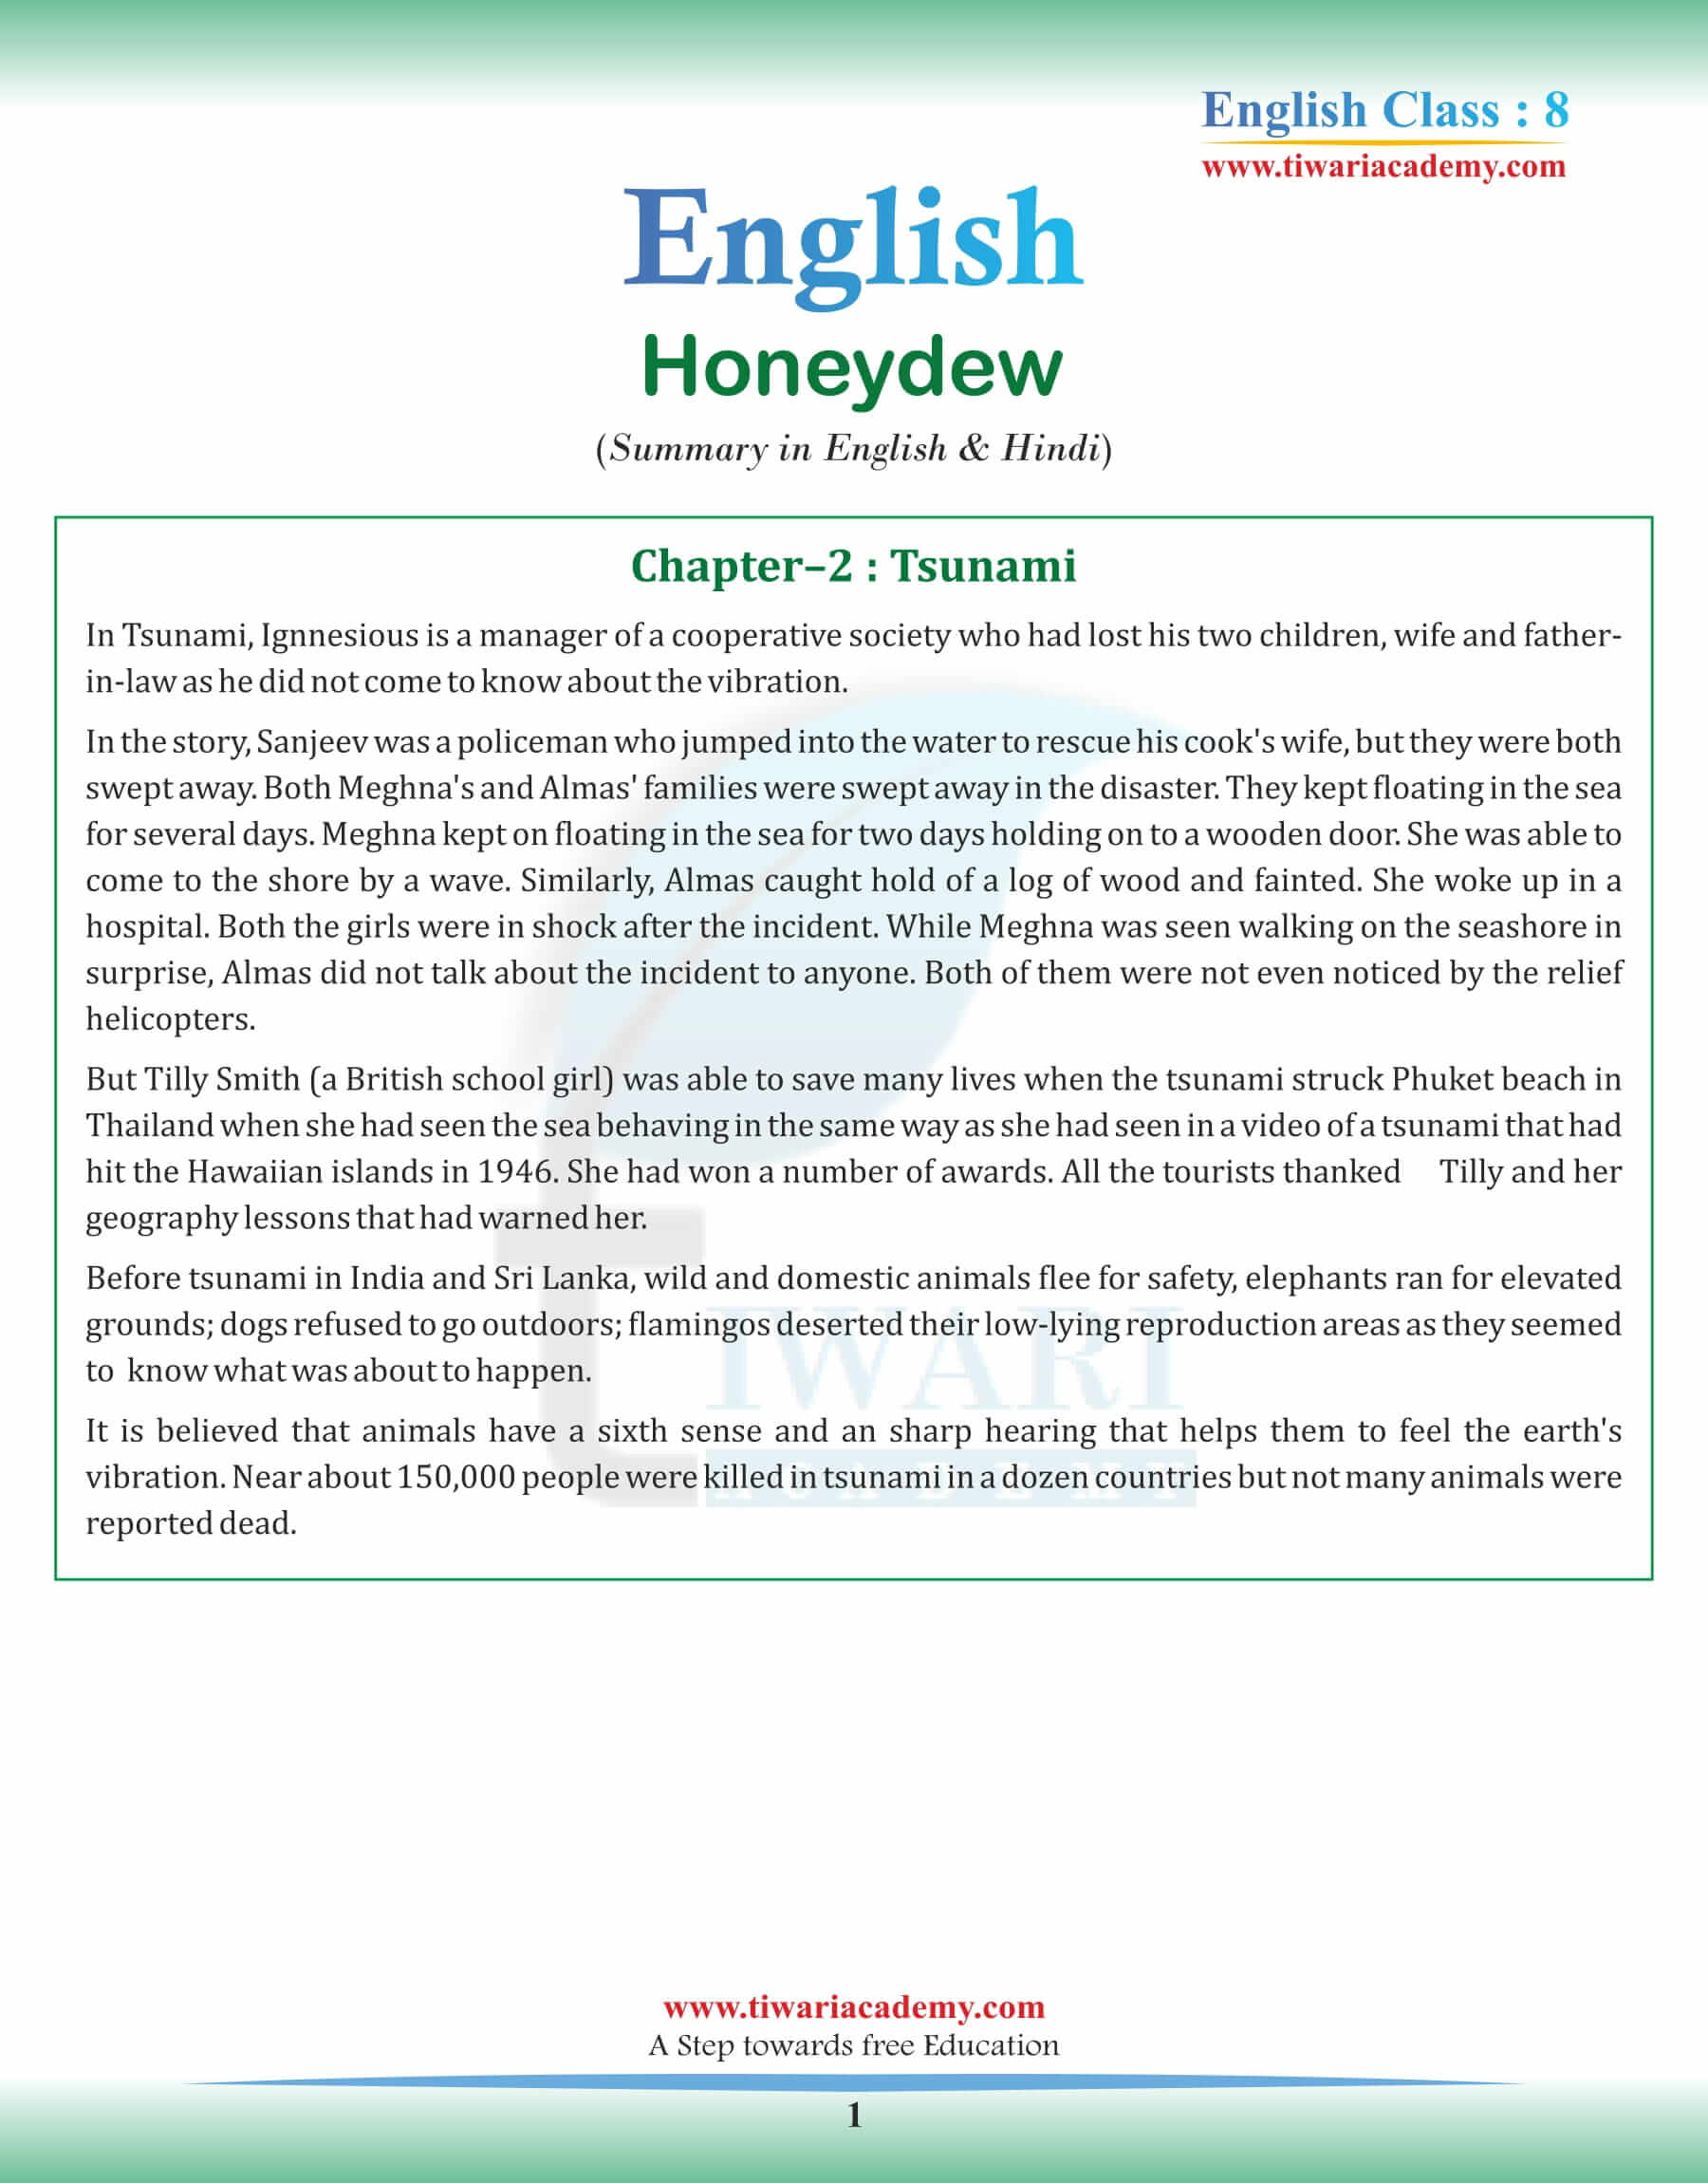 Class 8 English Chapter 2 Summary in English